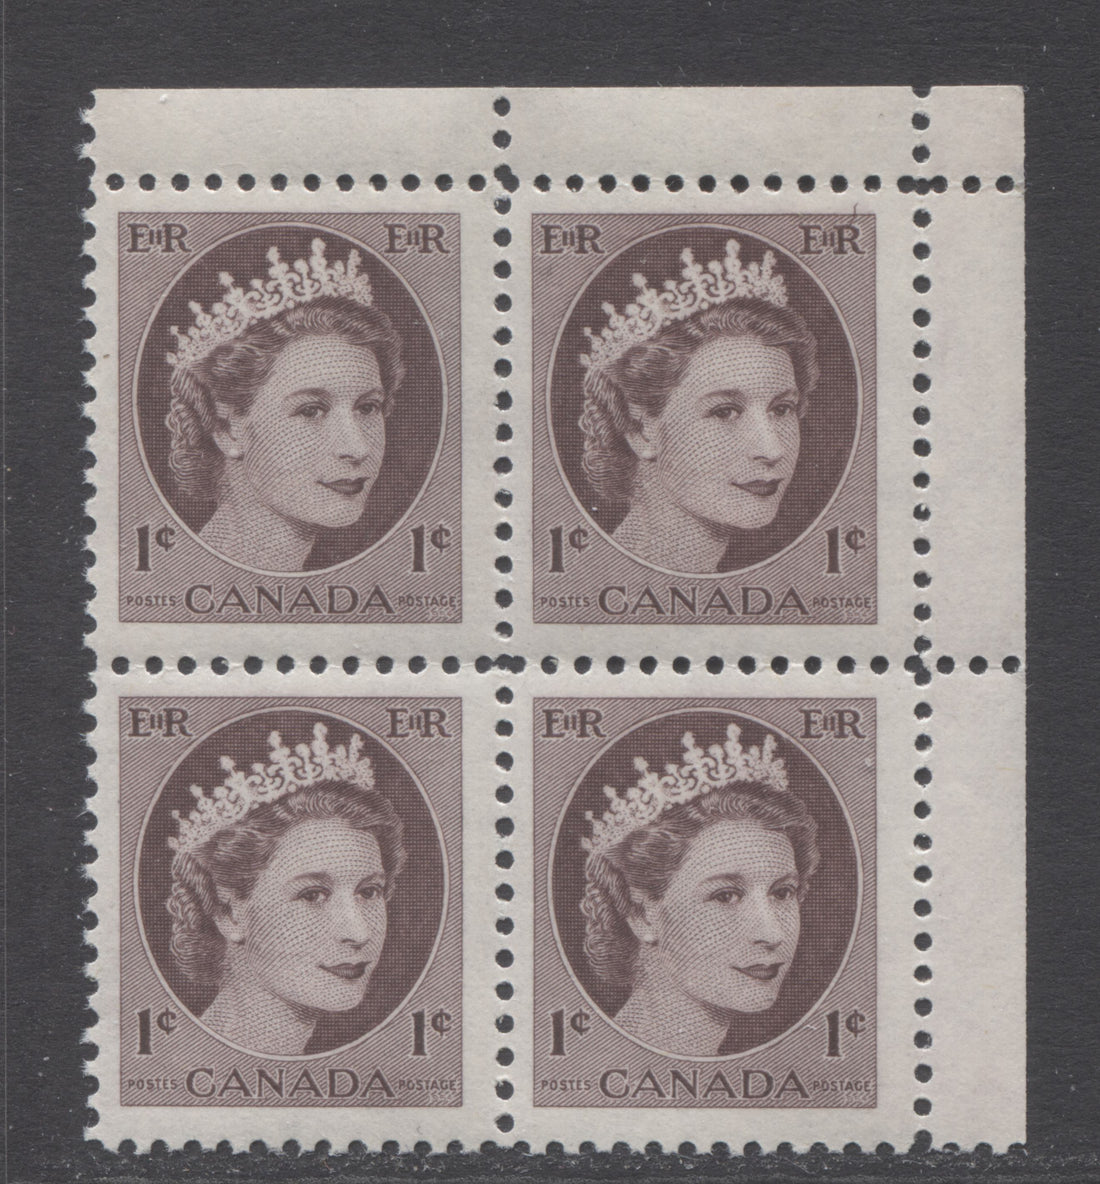 Collecting The 1954-1962 Wilding Issue and The Significance of the Plate Blocks